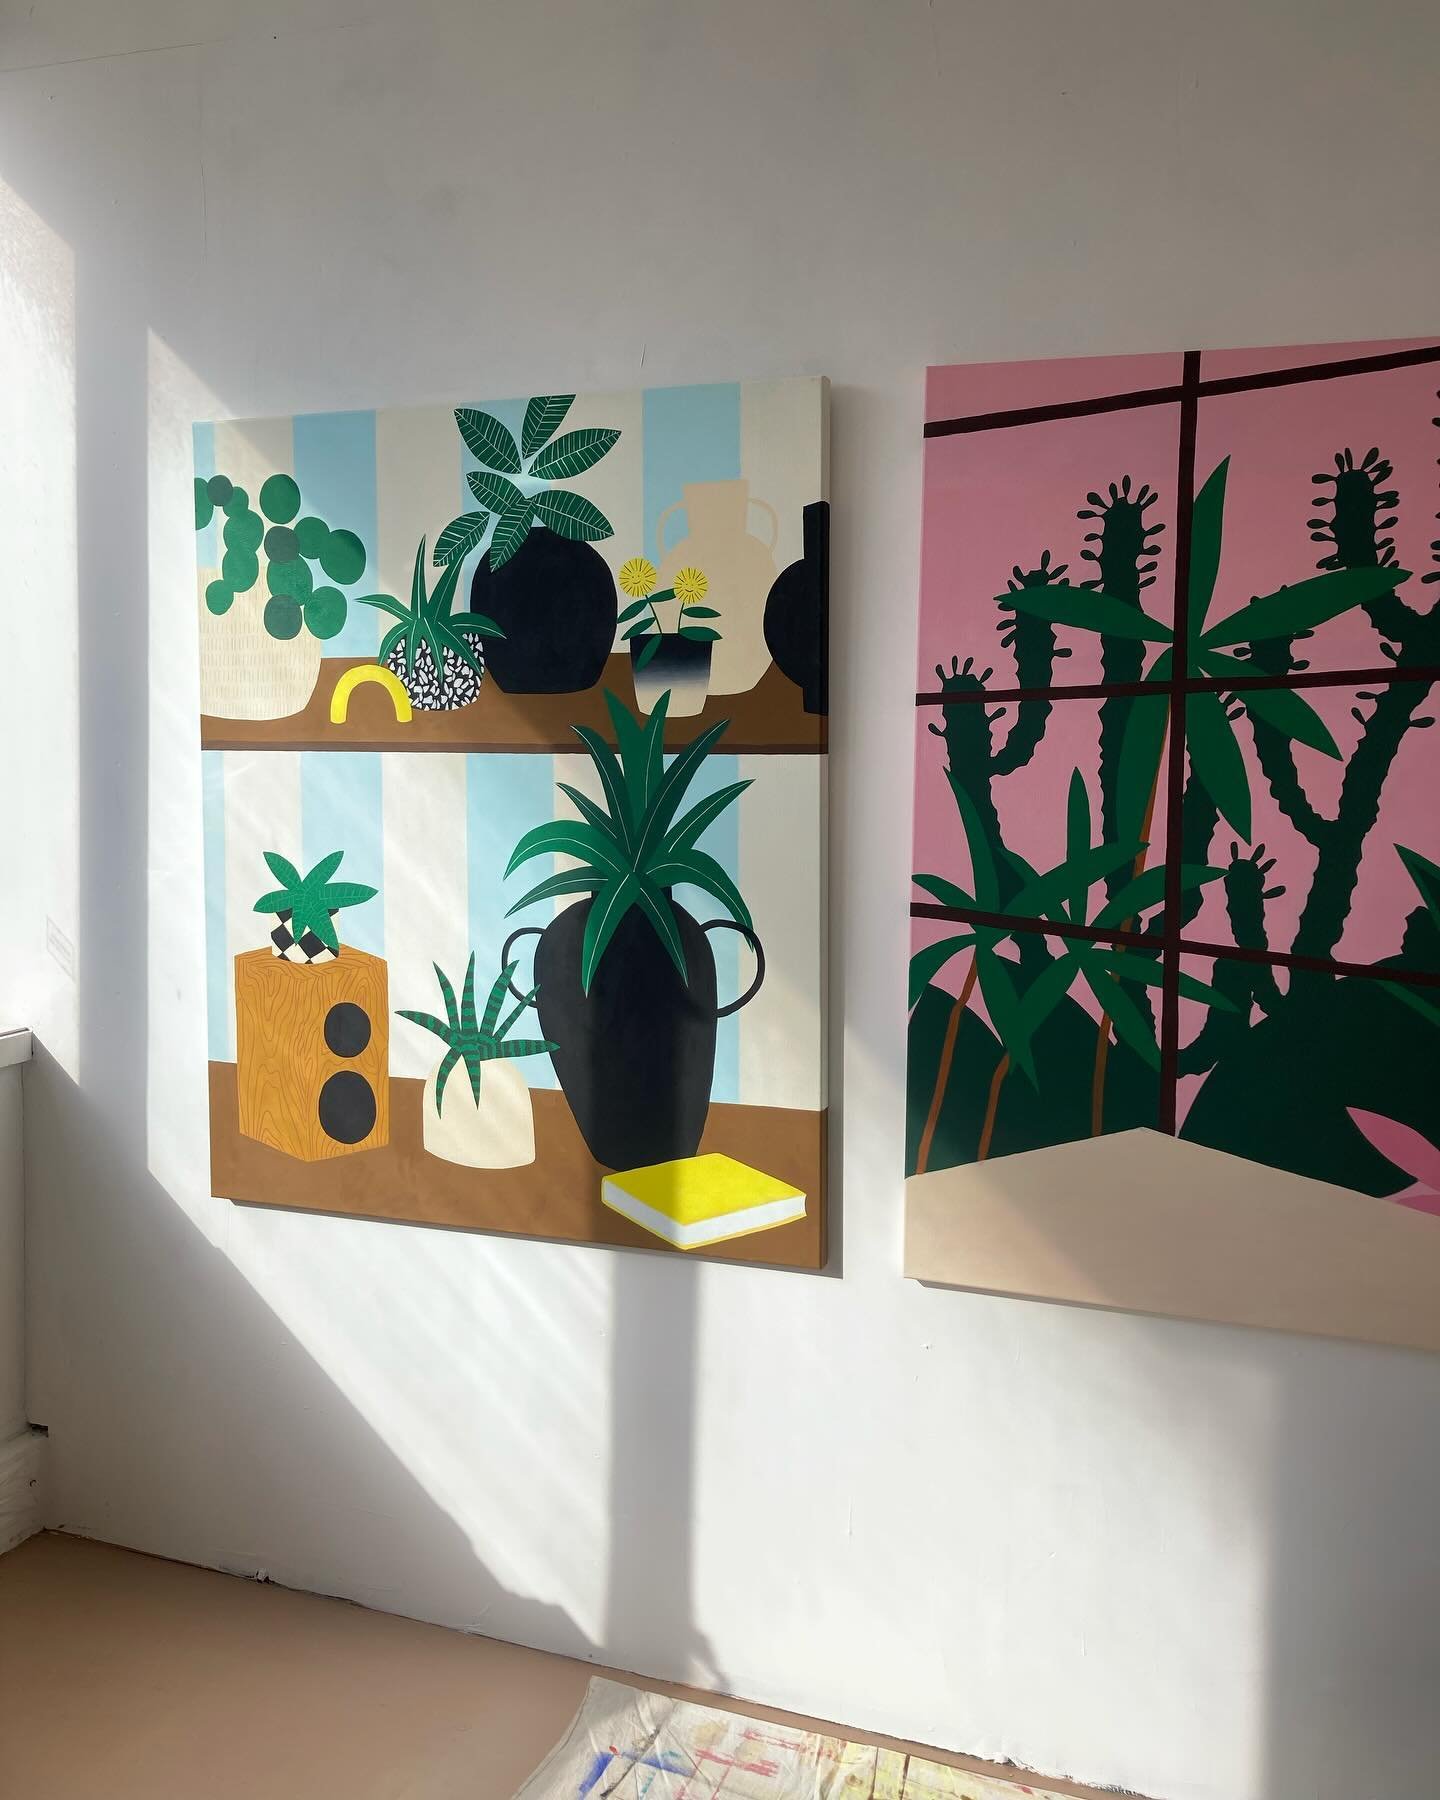 When the sun finally hits the studio.. ✨Been a bit quiet here lately but I&rsquo;ve been mainly busy working on a couple of illustrations projects and getting into the groove in this new space. Really enjoying being able to work on a few pieces simul